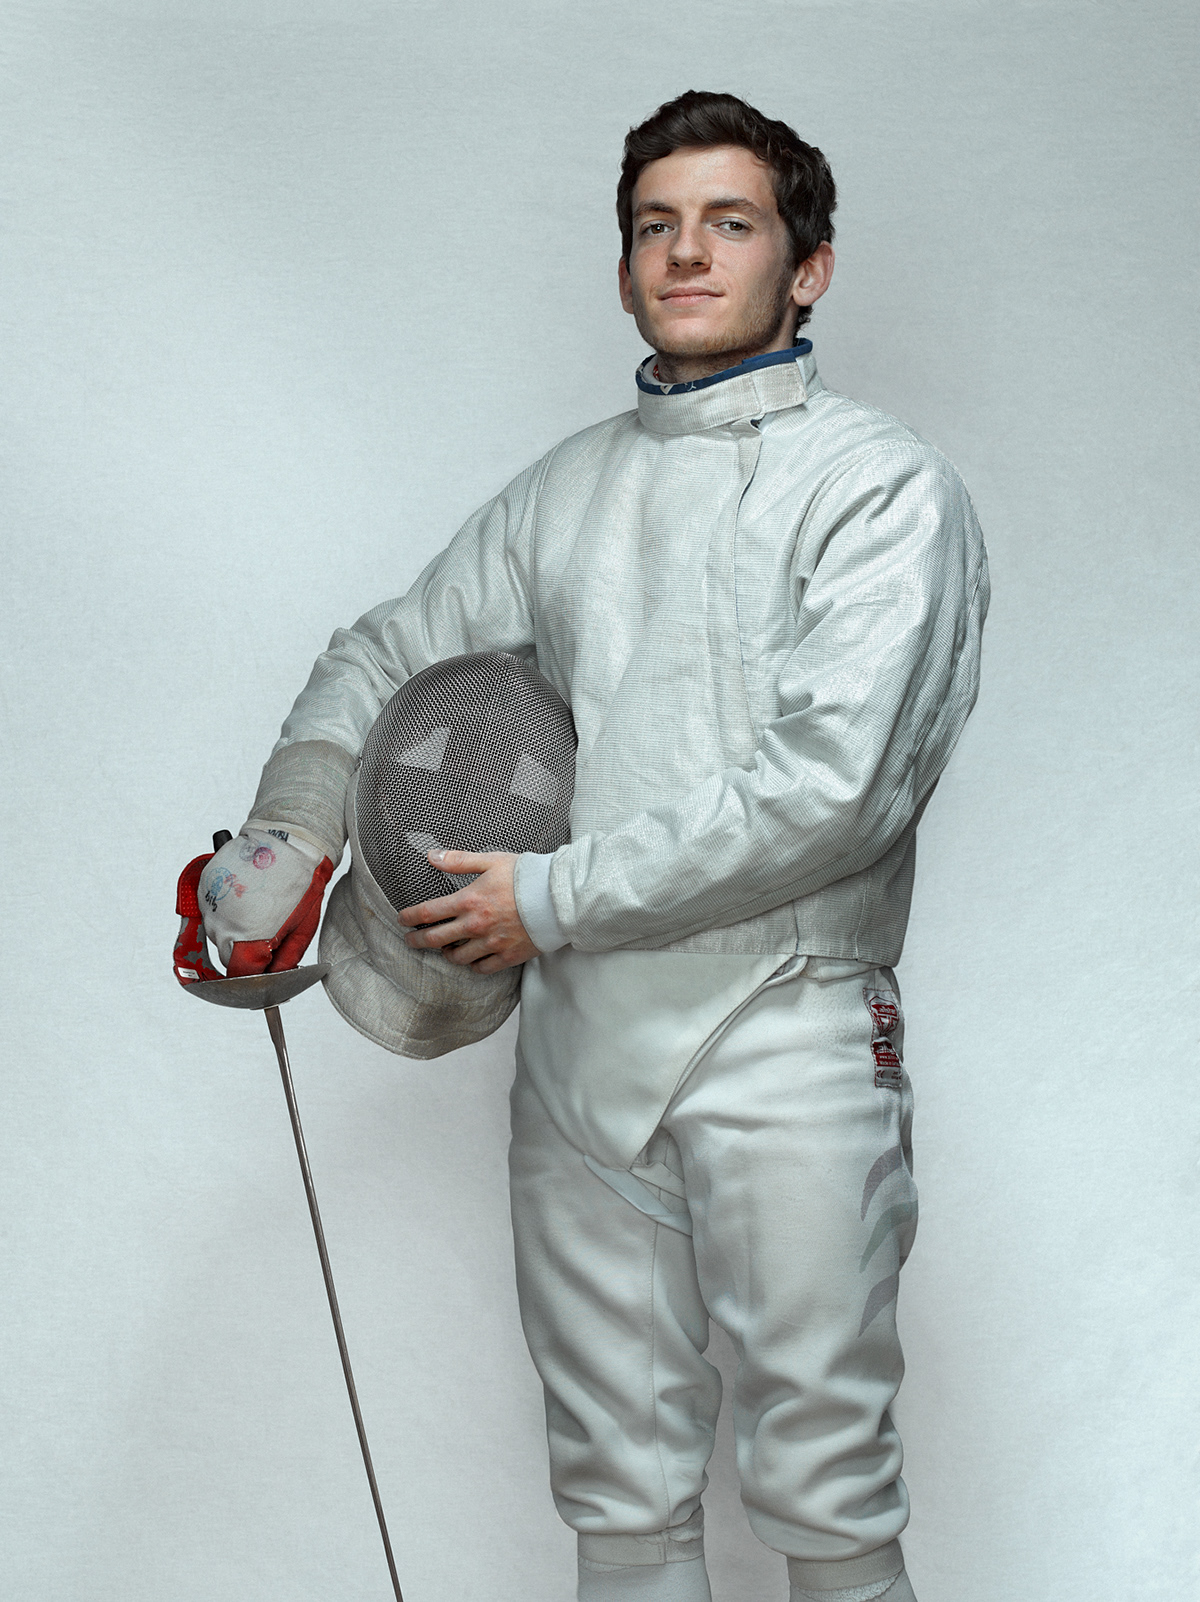 fencing Photography  fencer photoserie action sport olympic